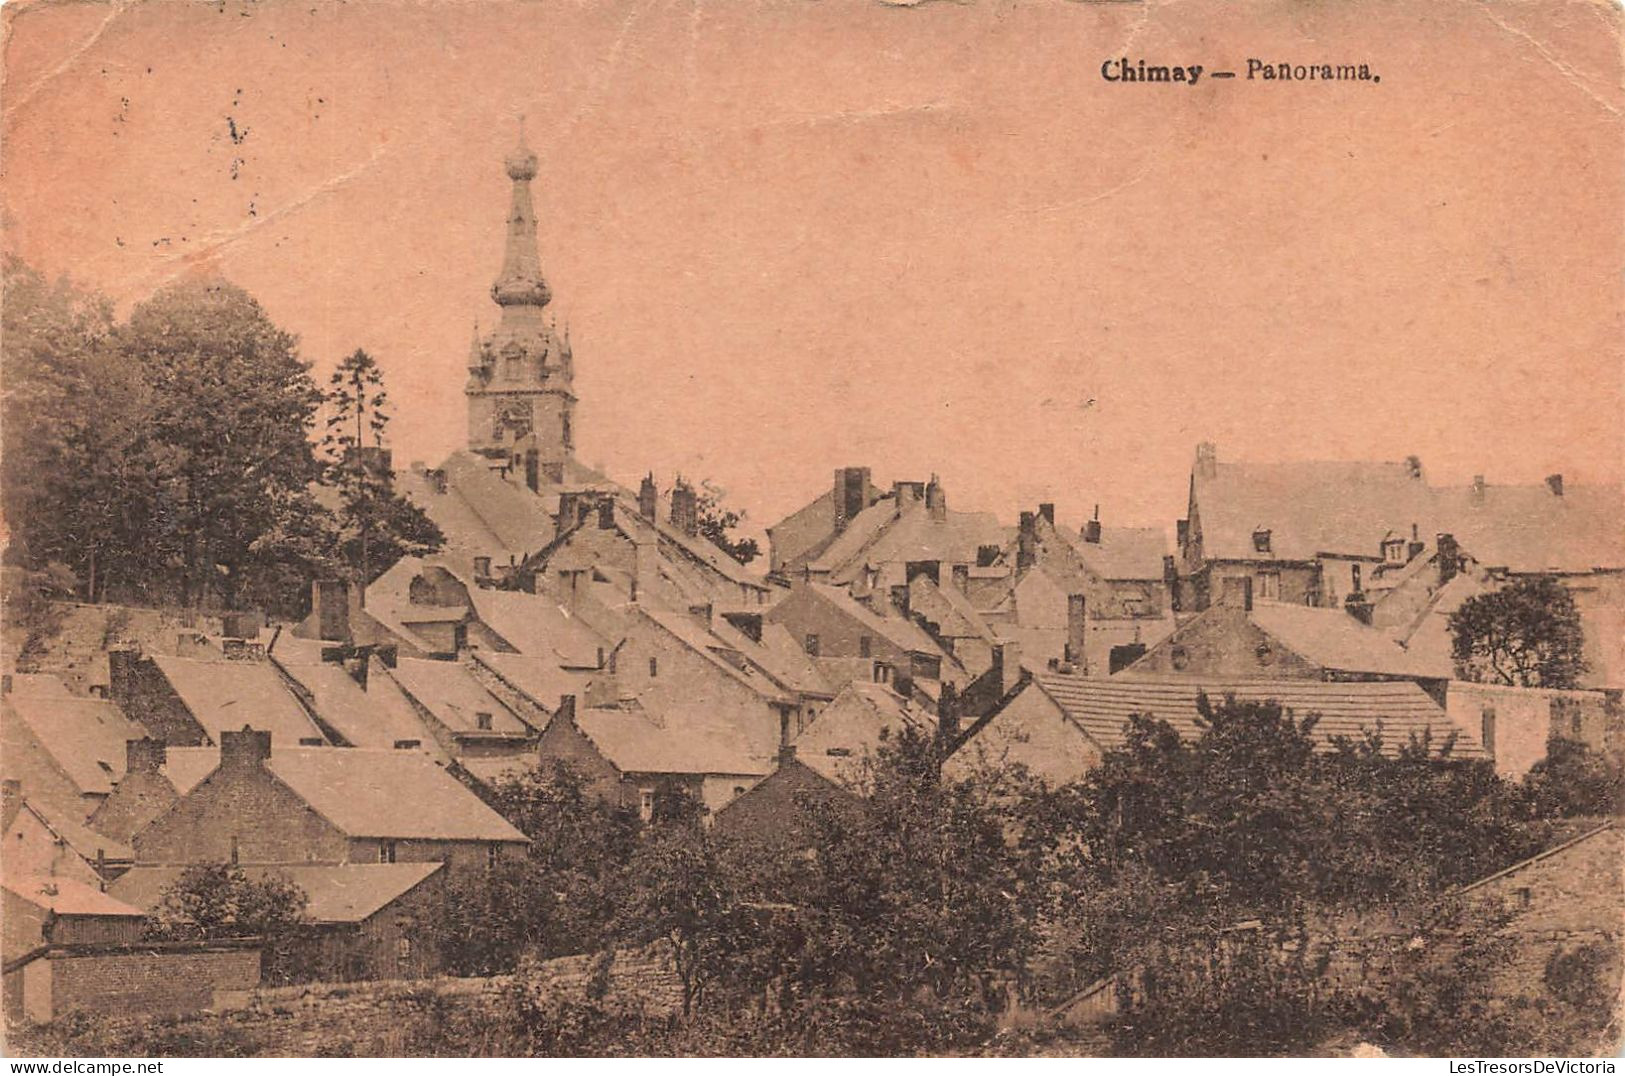 BELGIQUE - Chimay - Panorama - Eglise Et Toitures - Carte Postale Ancienne - Chimay